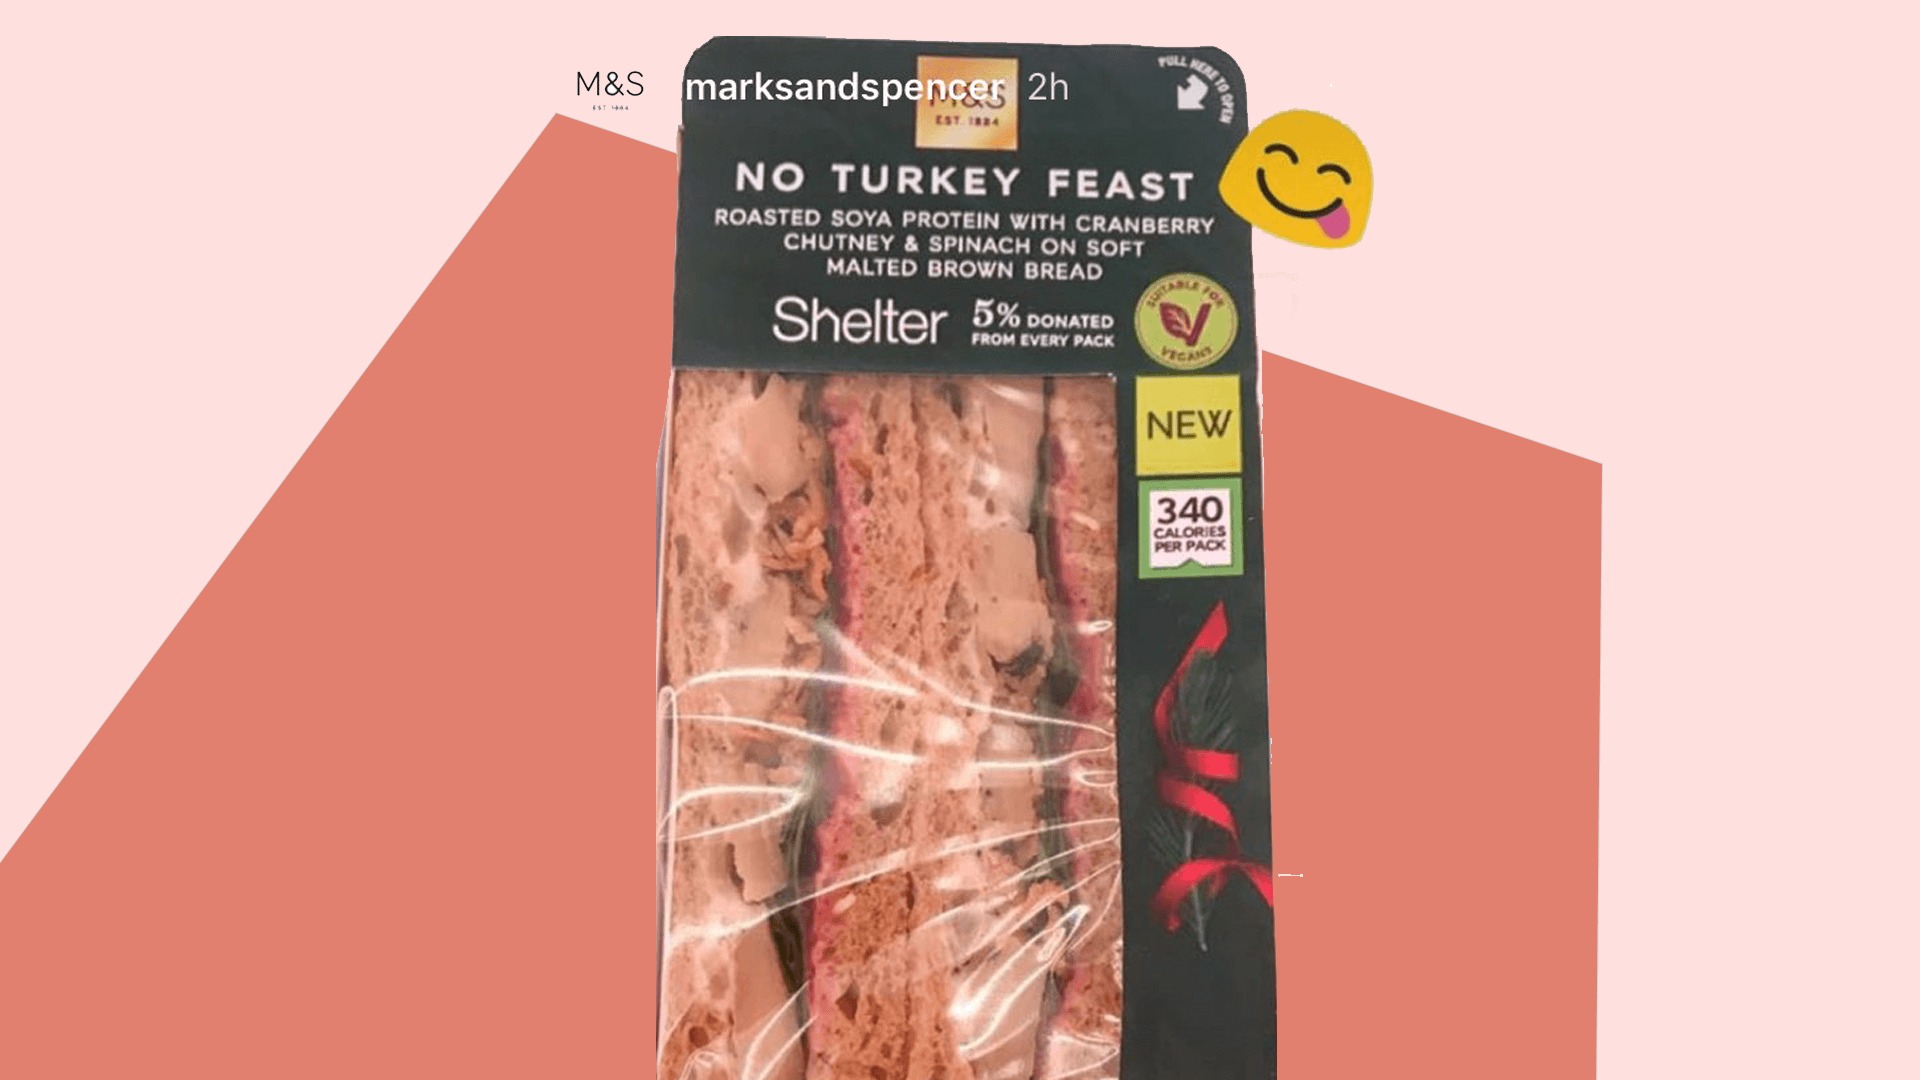 Vegan 'No Turkey Feast' Christmas Sandwich Launches at Marks & Spencer Supermarkets | LIVEKINDLY